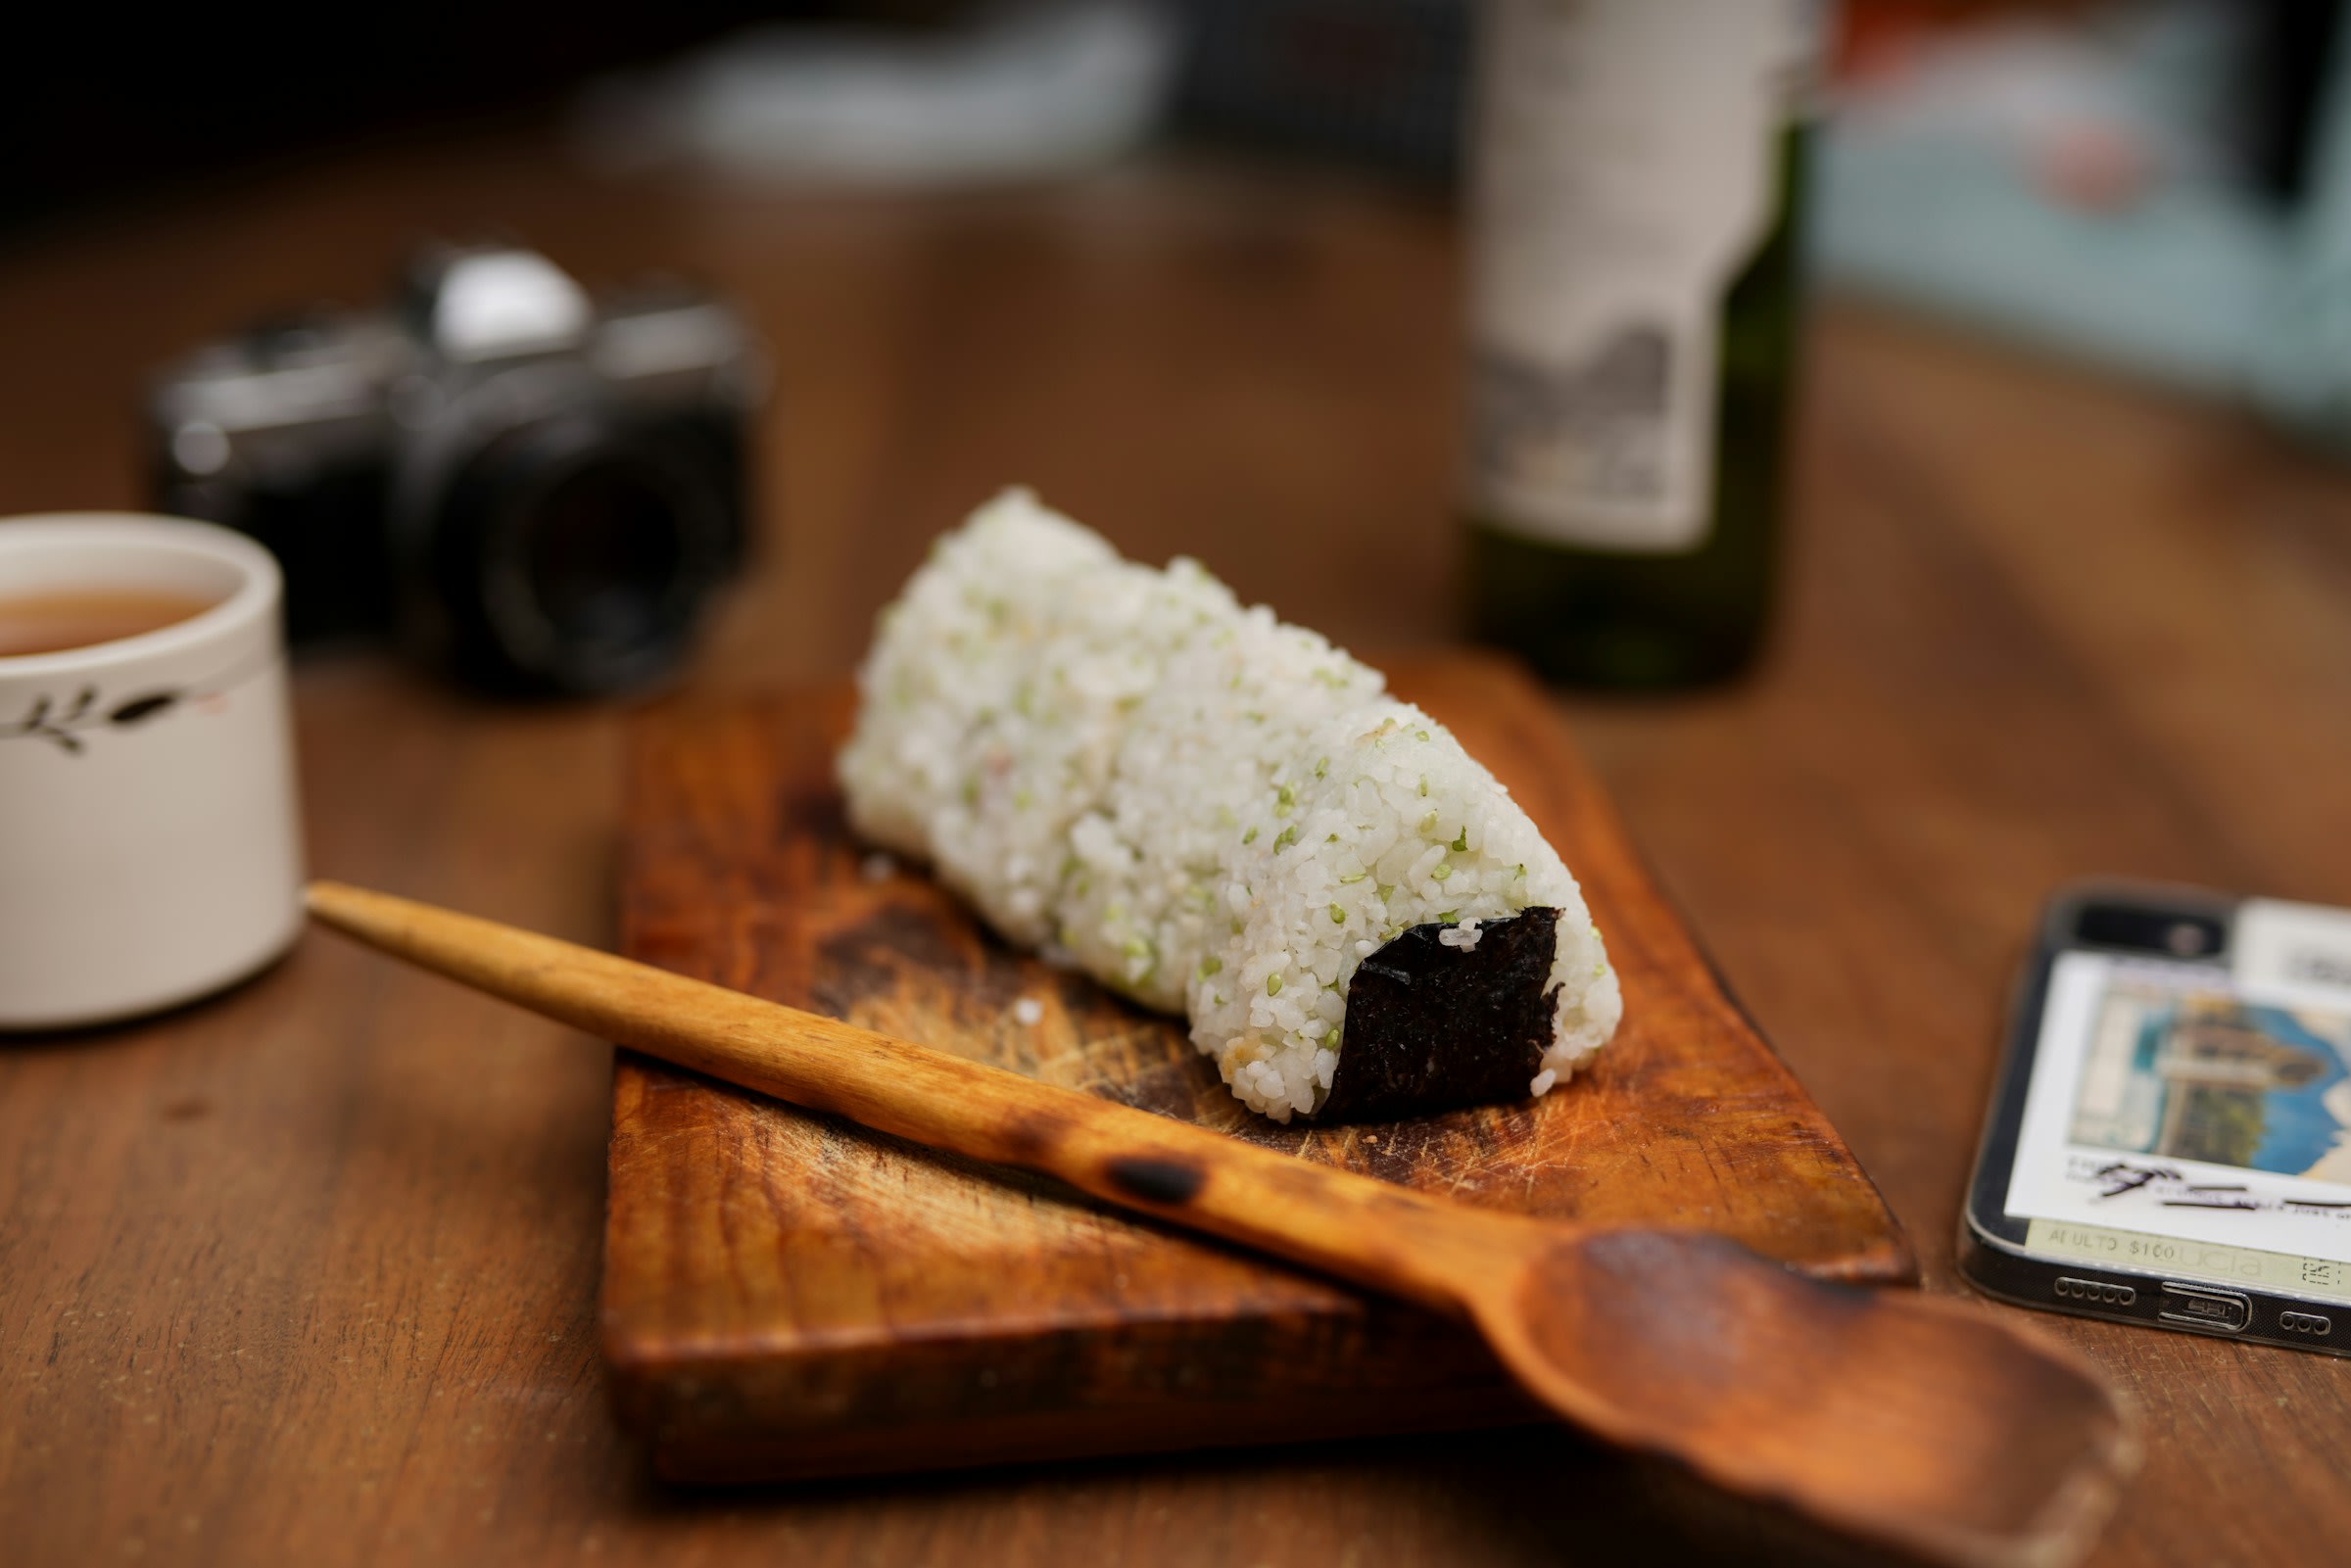 A line of four onigiri (rice balls with a seaweed wrapper) lined up on a wooden board.